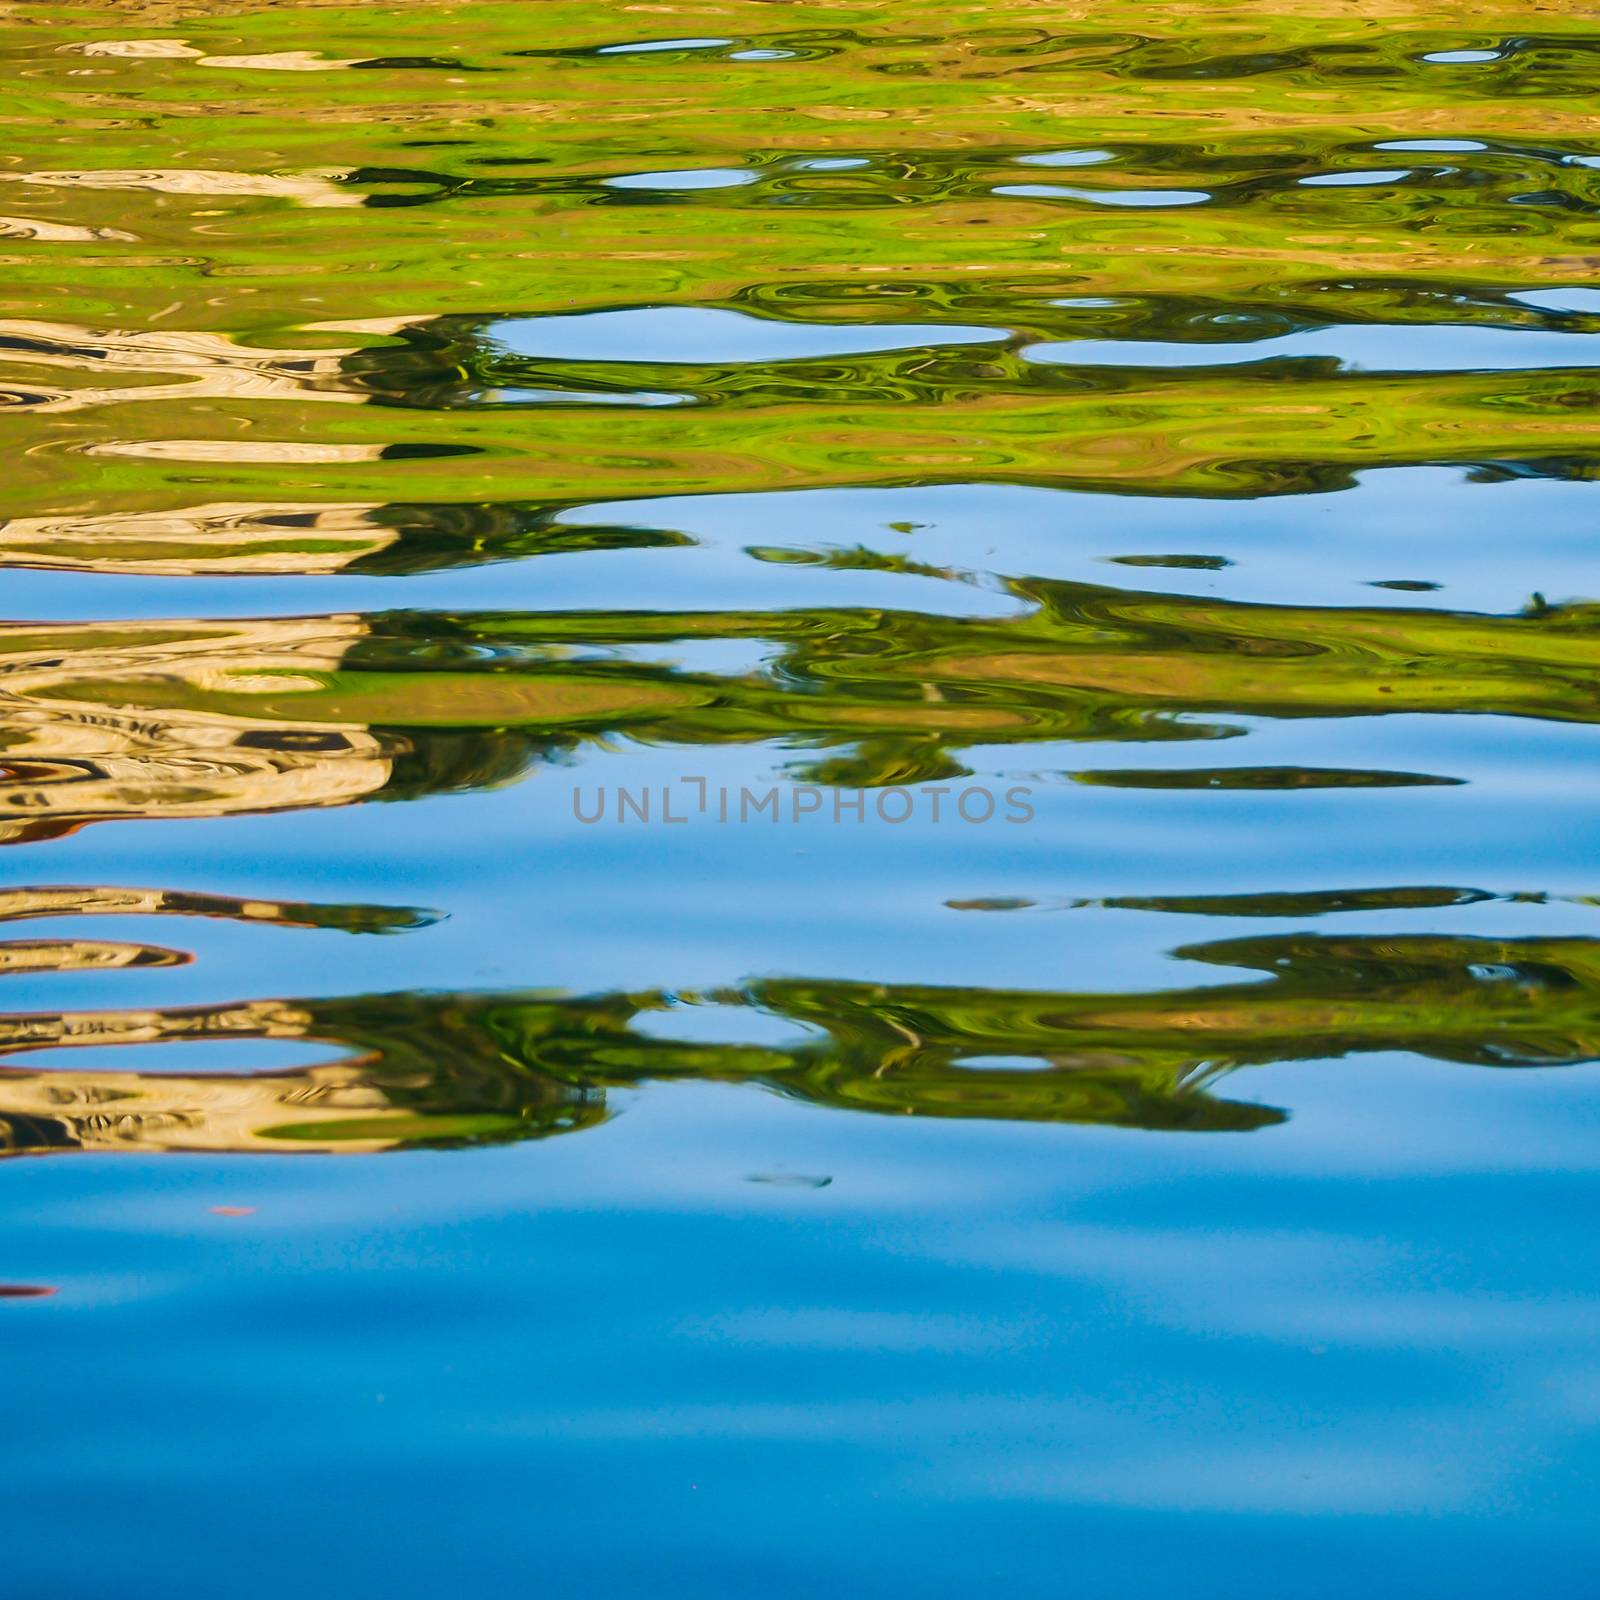 Colorful patterns of blue, brown and green are seen in reflections in the water of a lake